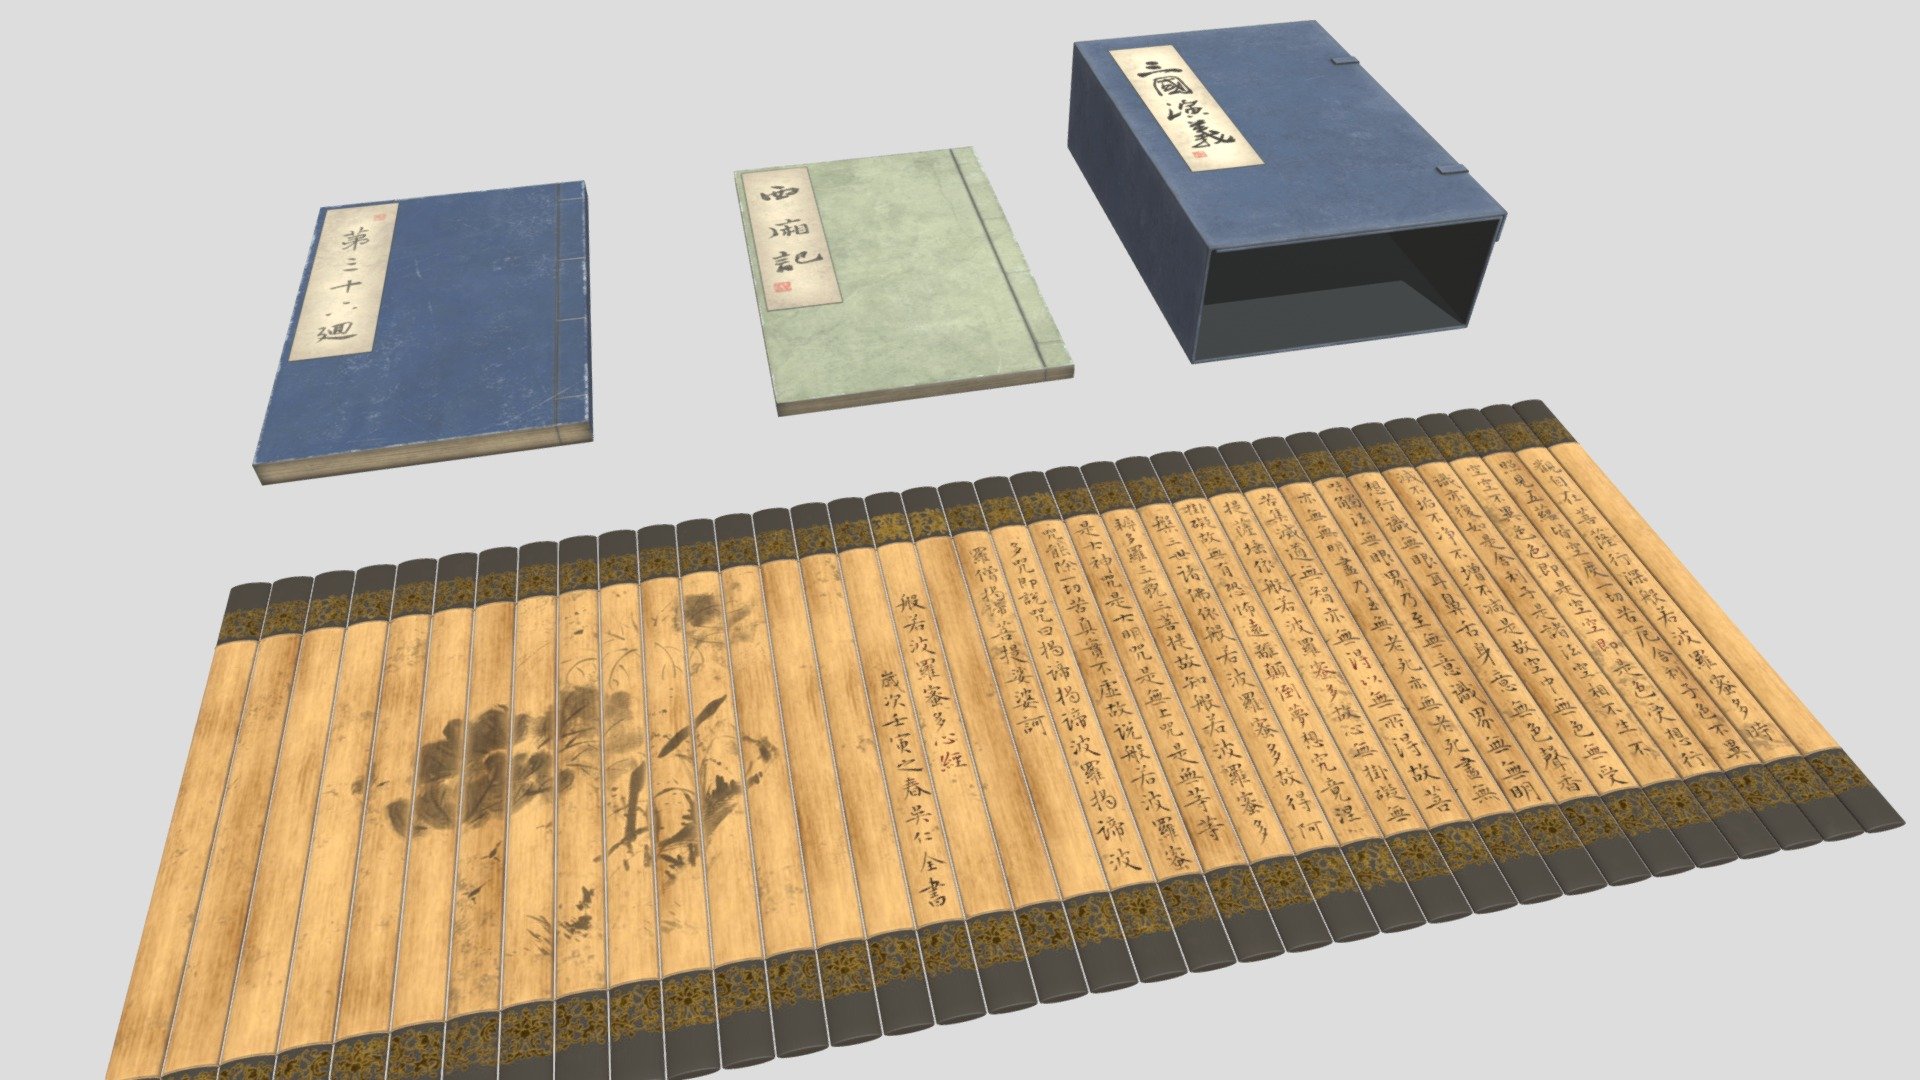 This model is a set of ancient Chinese books
The content of the model includes: 2 books, 1 envelope, and 1 bamboo slip
The packet contains the following
Number of sides: 324535
Vertices: 324724
File Type: FBX
Textures: PBR
Texture size: 2K.4K
UV: Yes
Lighting: no
Camera: no
animation: none - BOOK - Buy Royalty Free 3D model by ChineseVillage 3d model